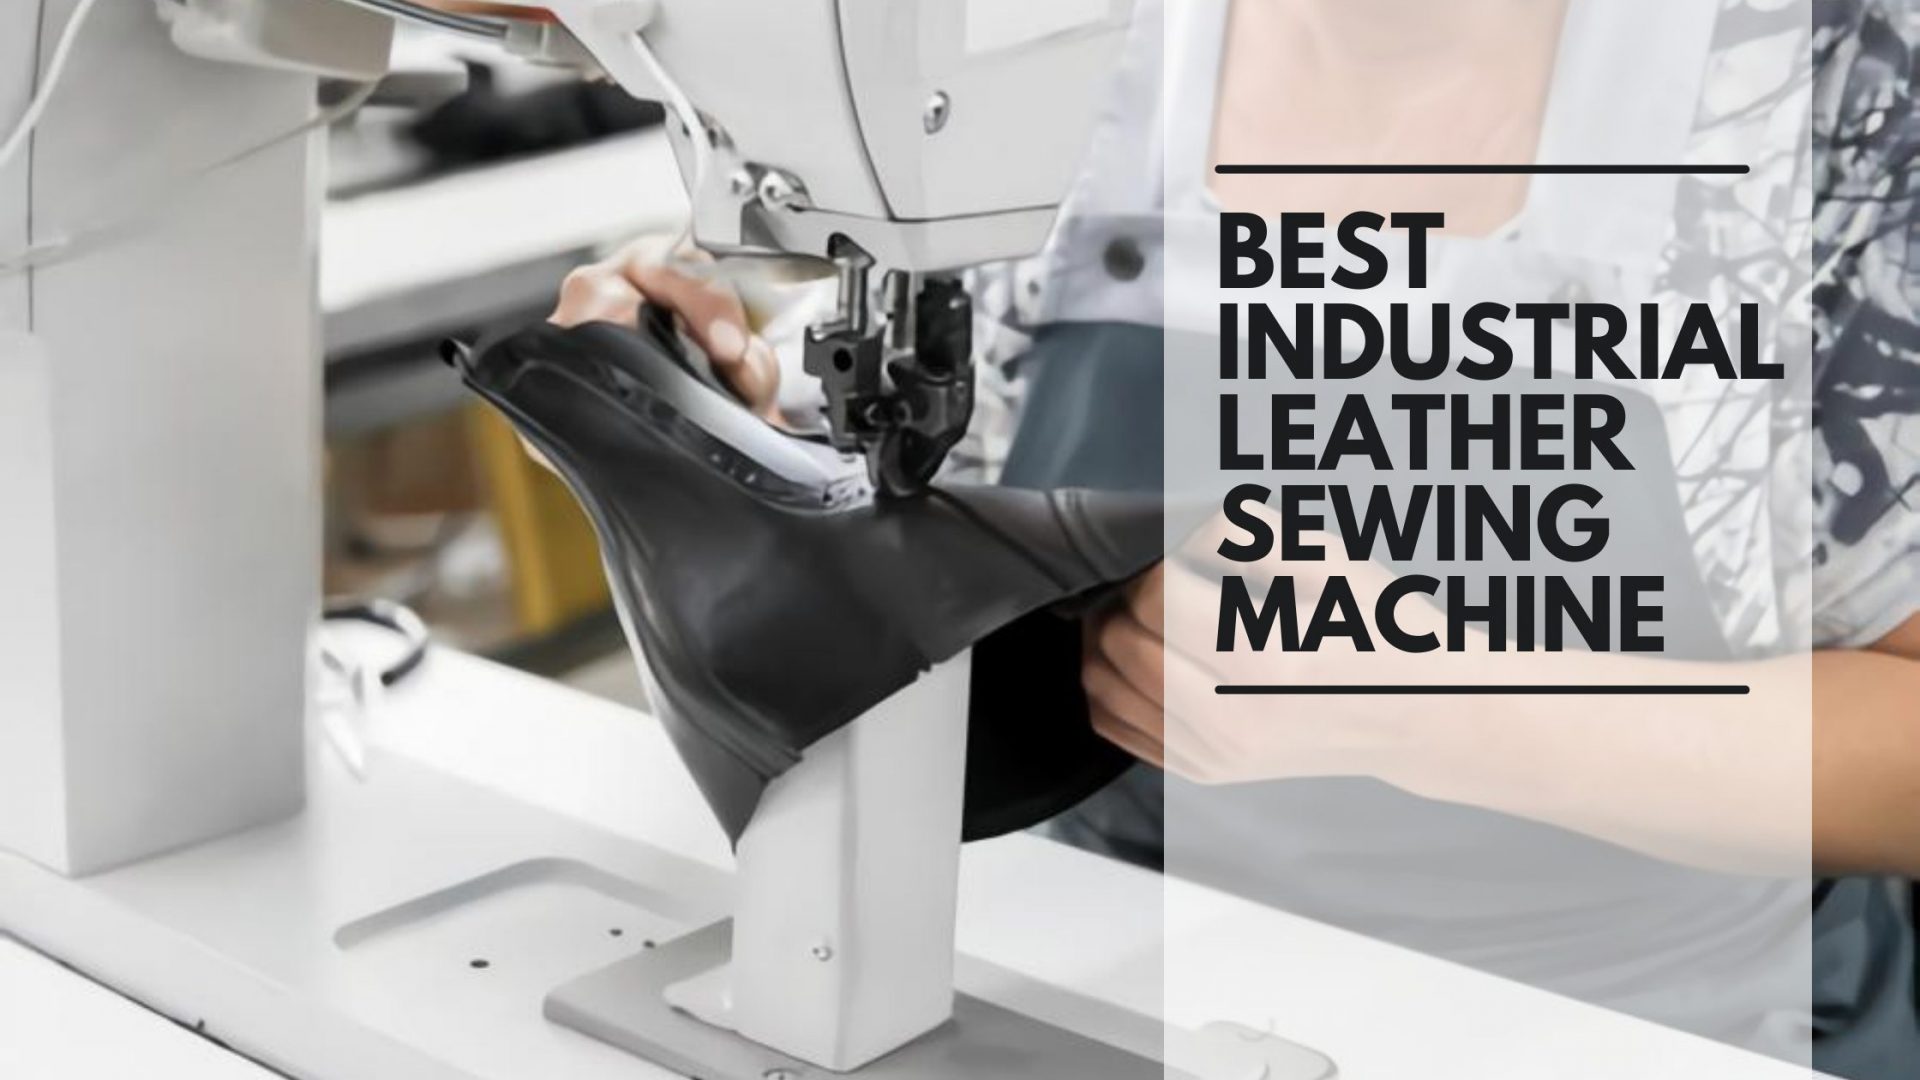 Best Industrial Leather Sewing Machine